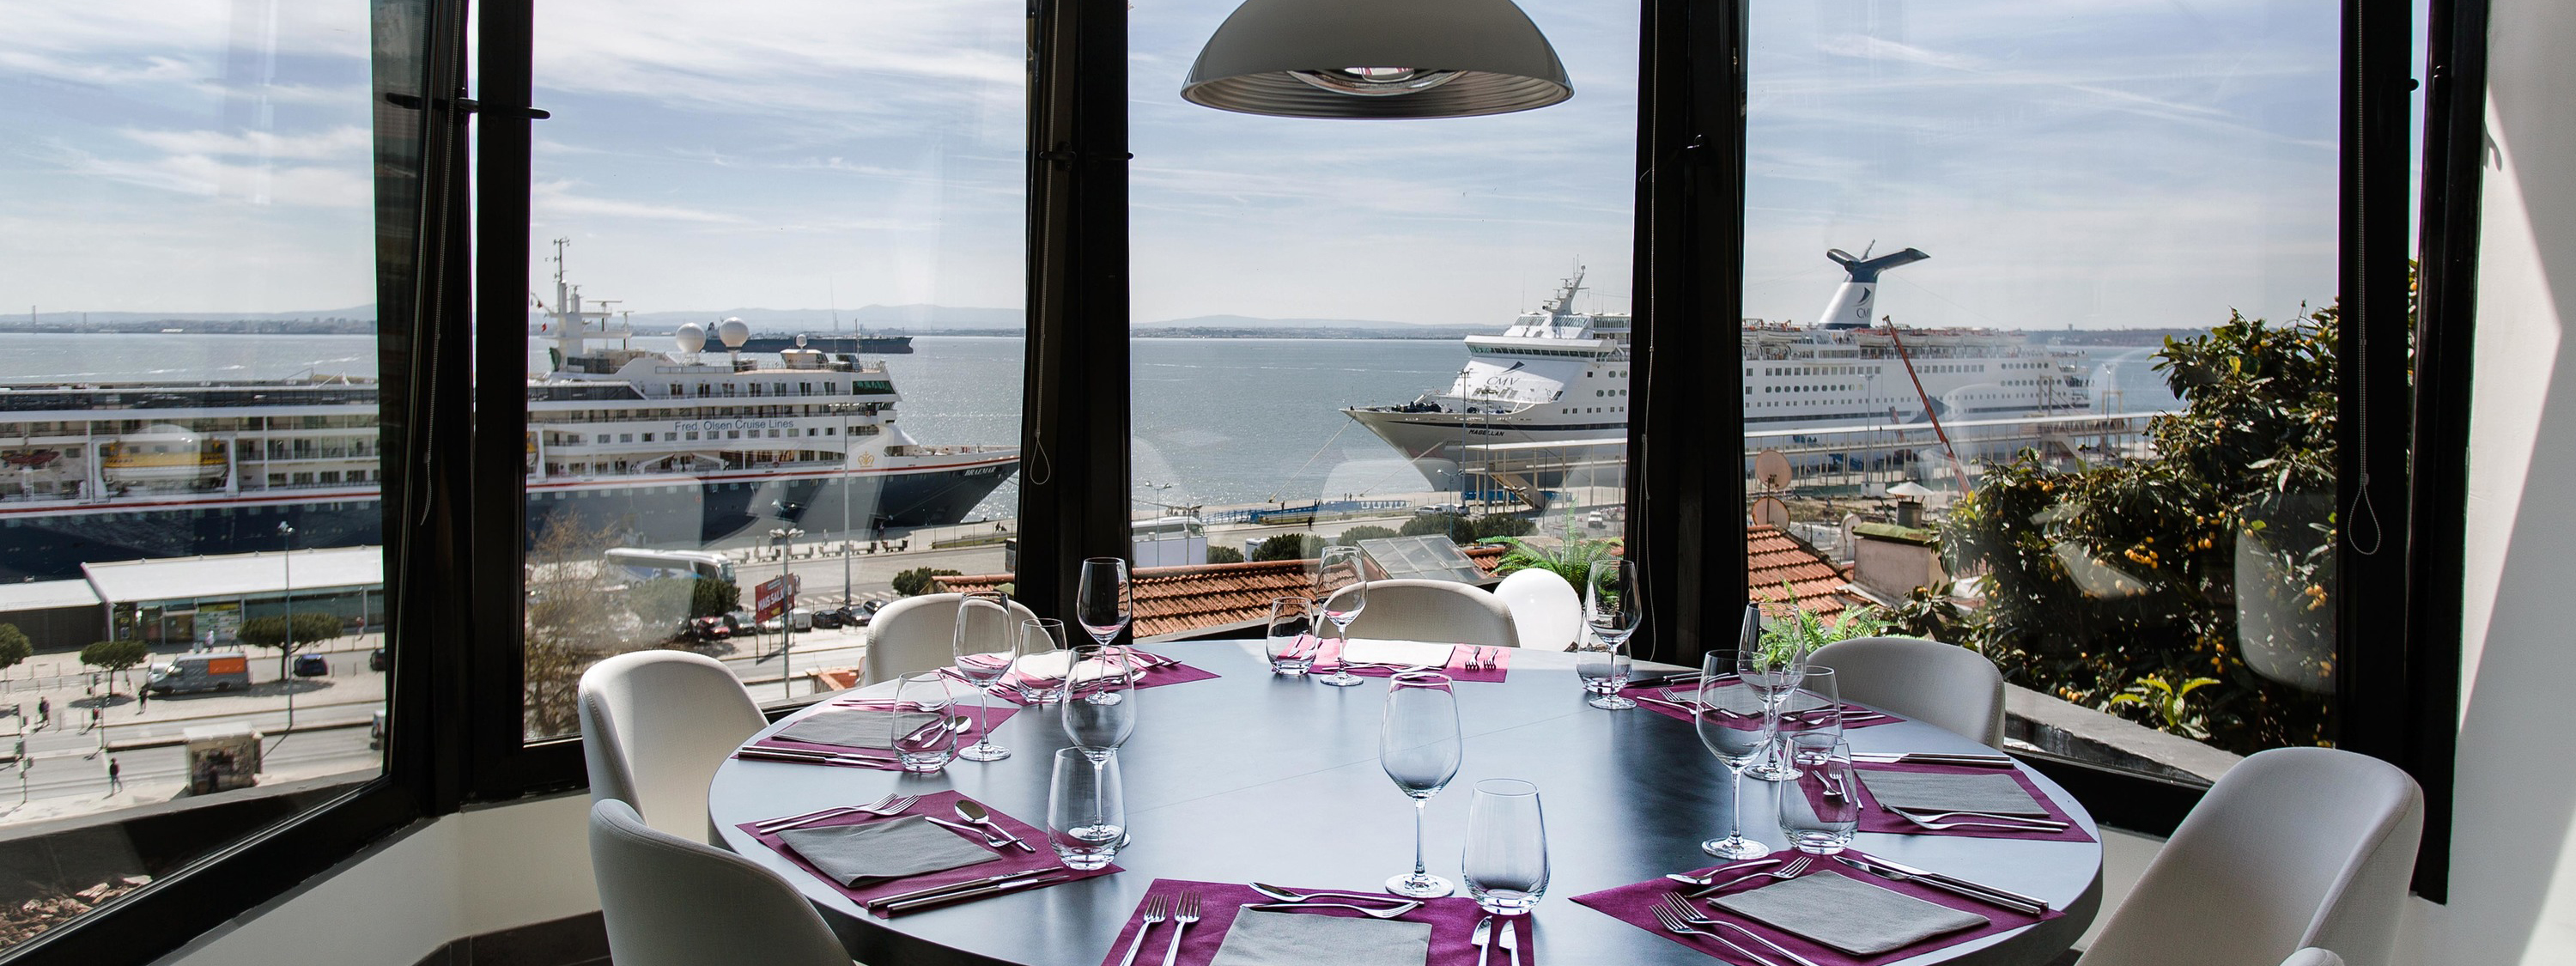 The interior of the Restaurant Faz Figura, with a round table set for a meal, and a window view of the Tagus river.